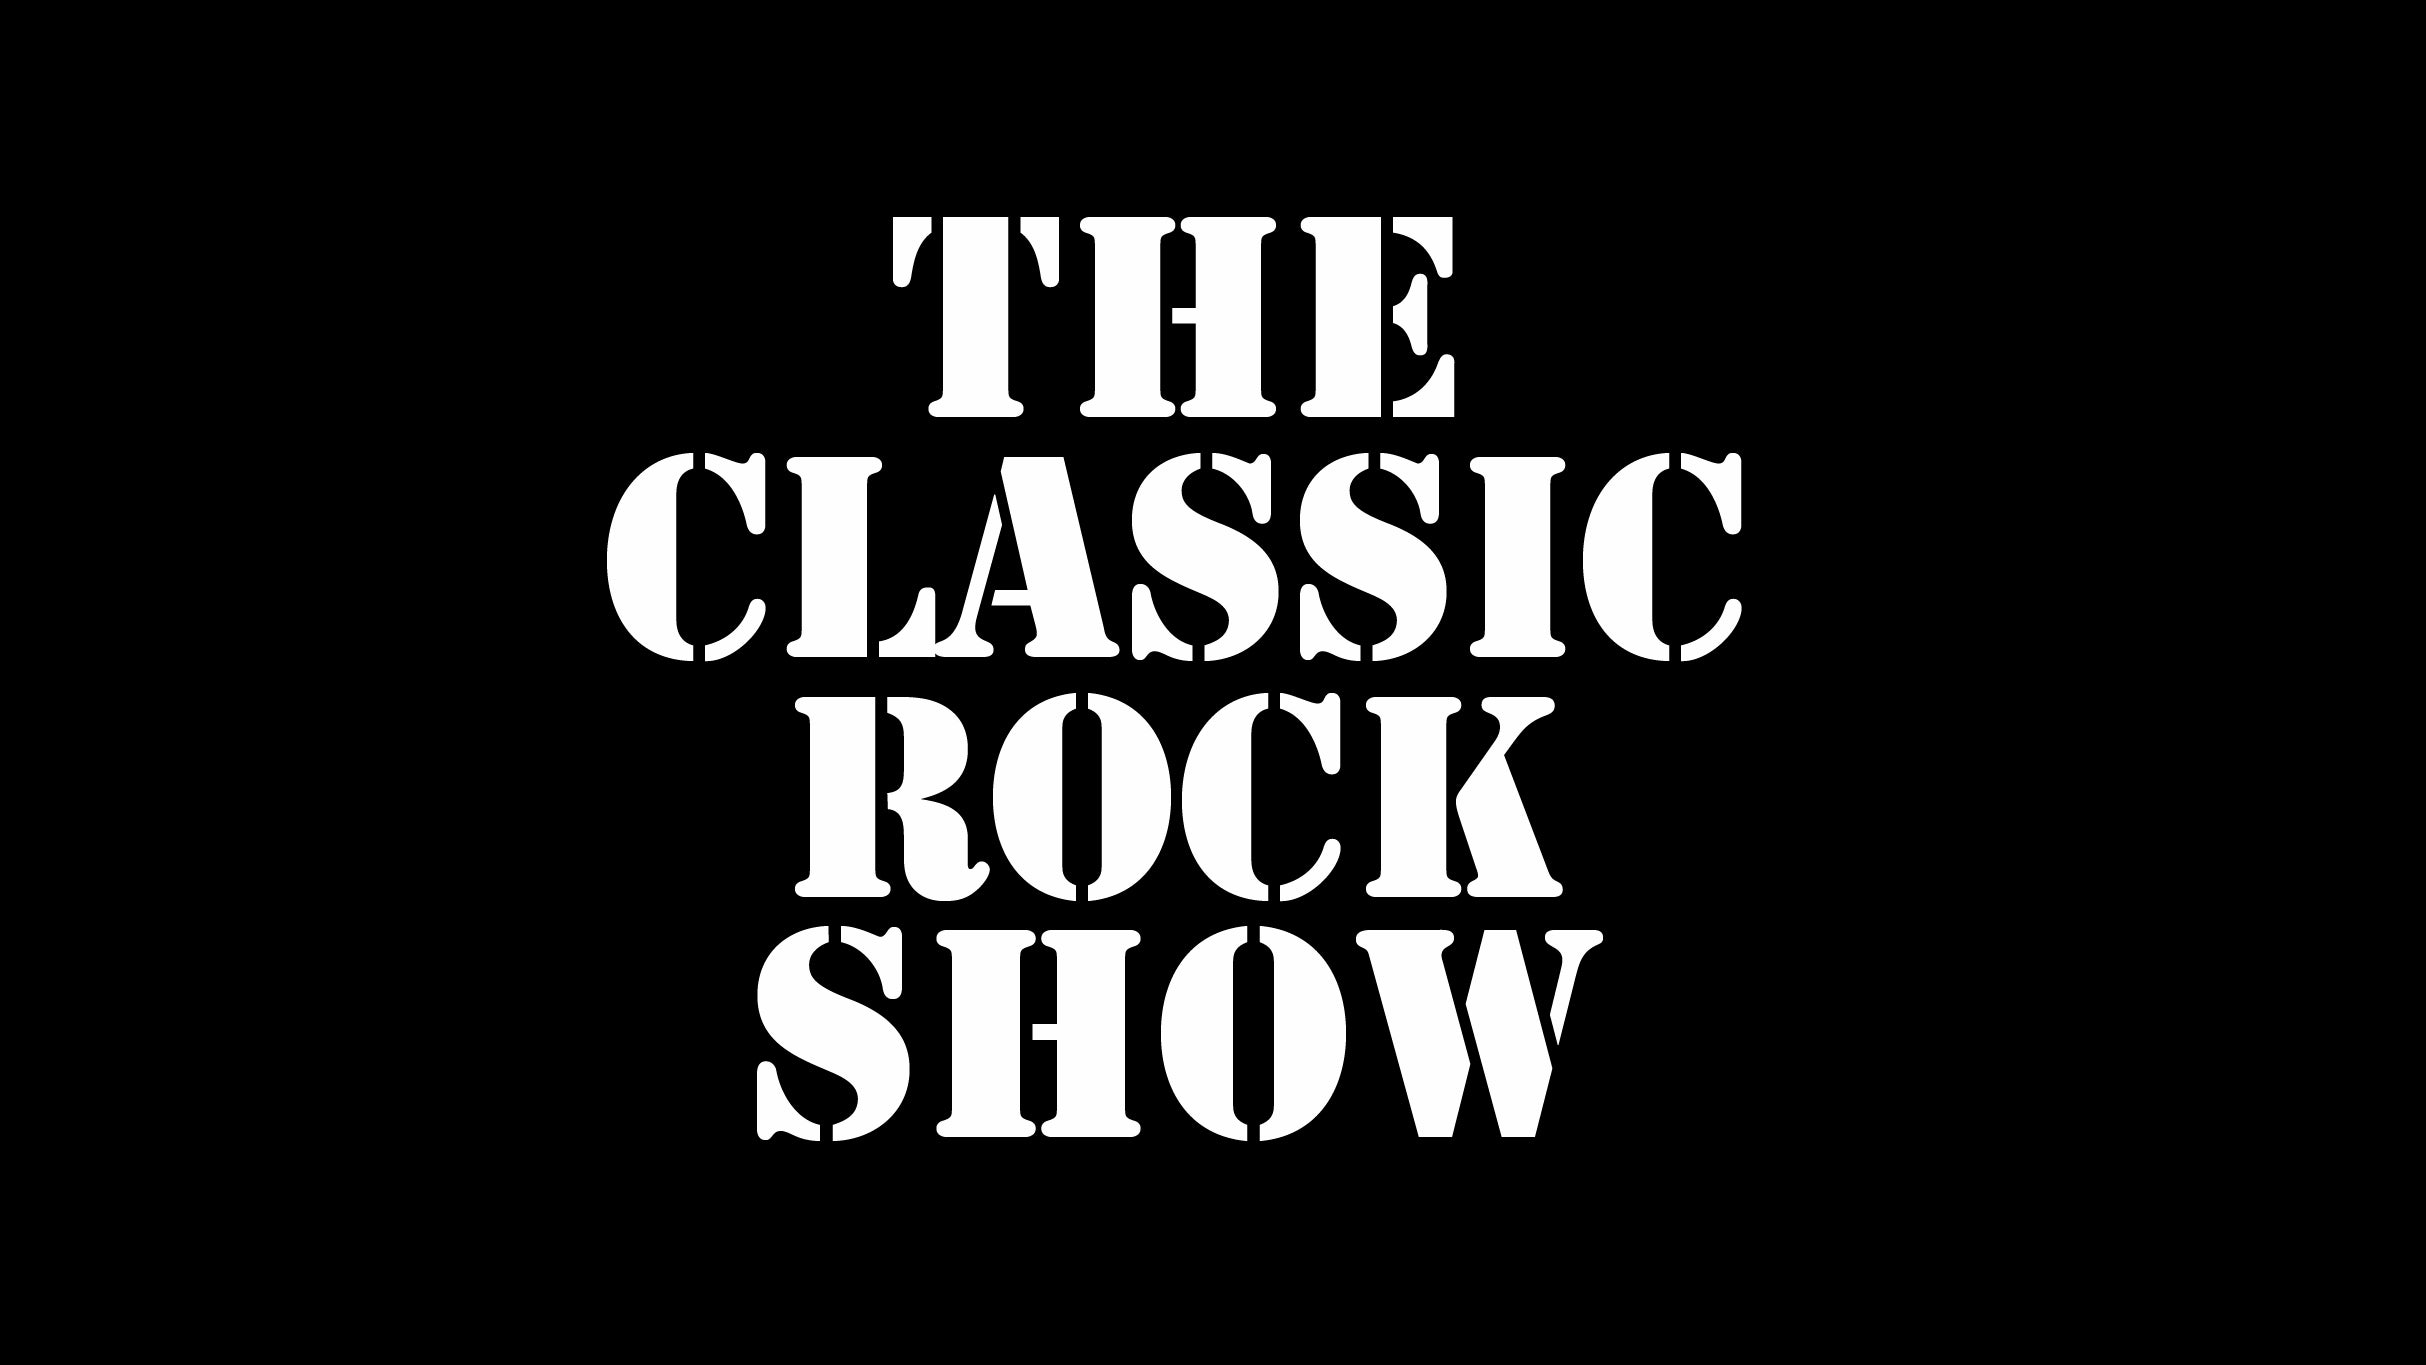 The Classic Rock Show at Fisher Theatre - Detroit